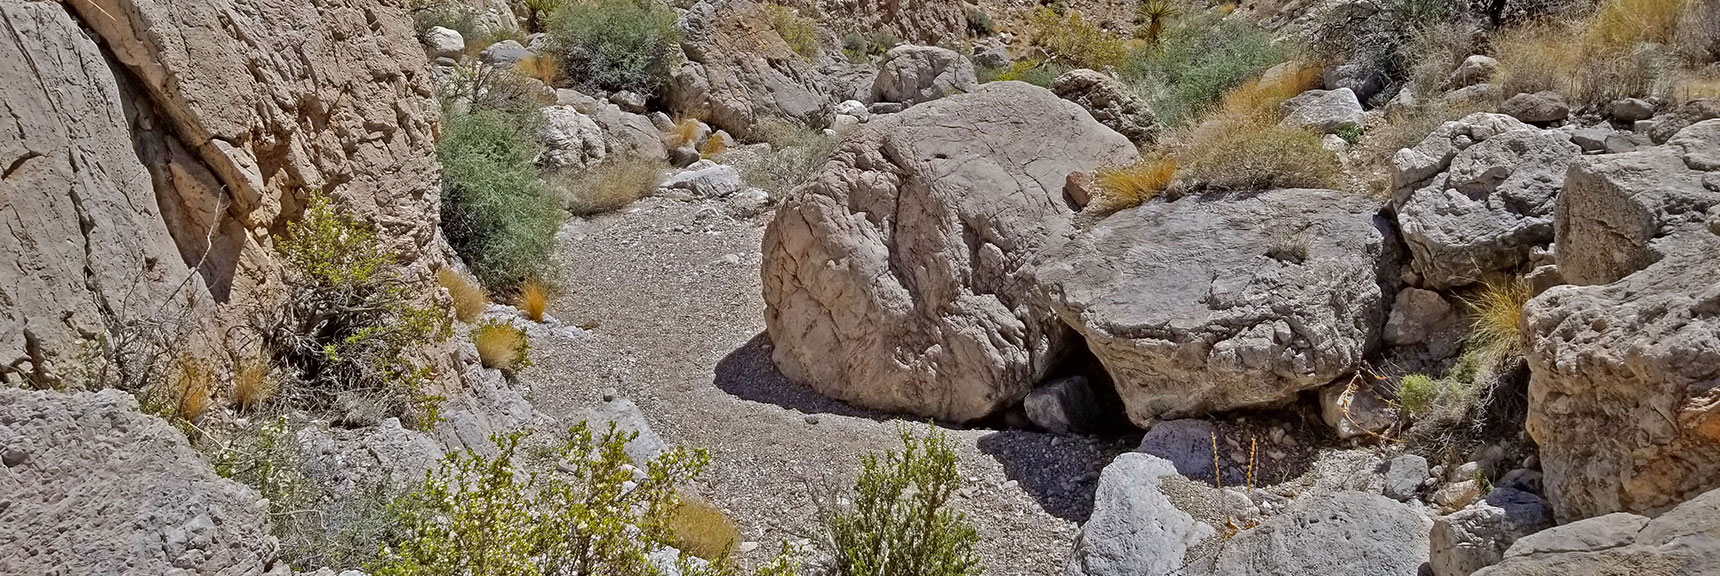 Approach Wash Choked with Boulders, But Not Too Bad...Just Weave Between | Little La Madre Mt, Little El Padre Mt, Little Burnt Peak | Near La Madre Mountains Wilderness, Nevada